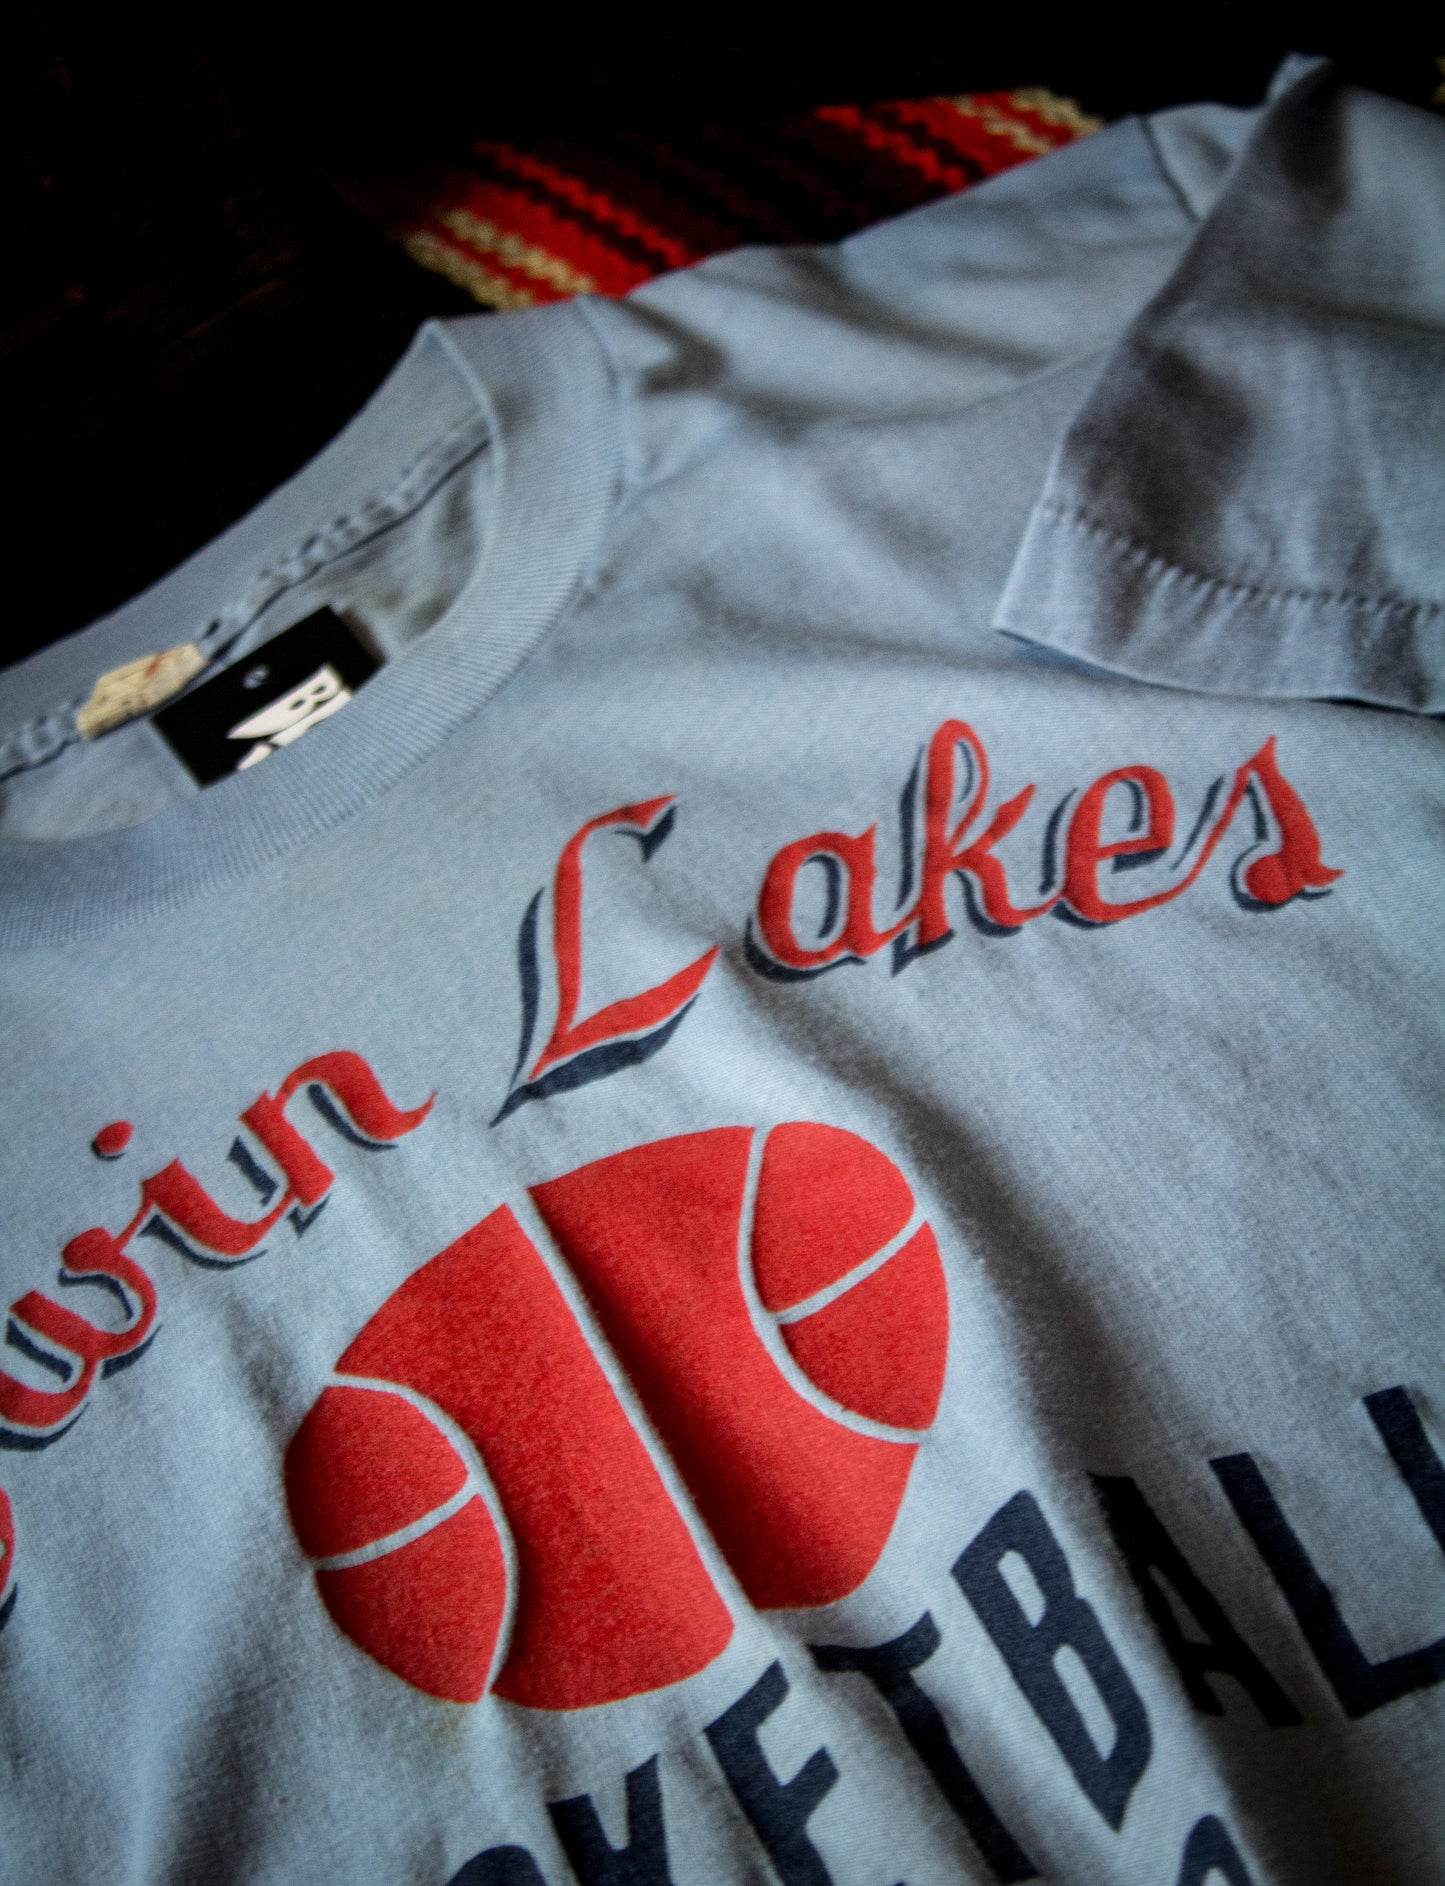 Vintage 80s Twin Lakes Basketball Camp Sky Blue Graphic T Shirt Medium